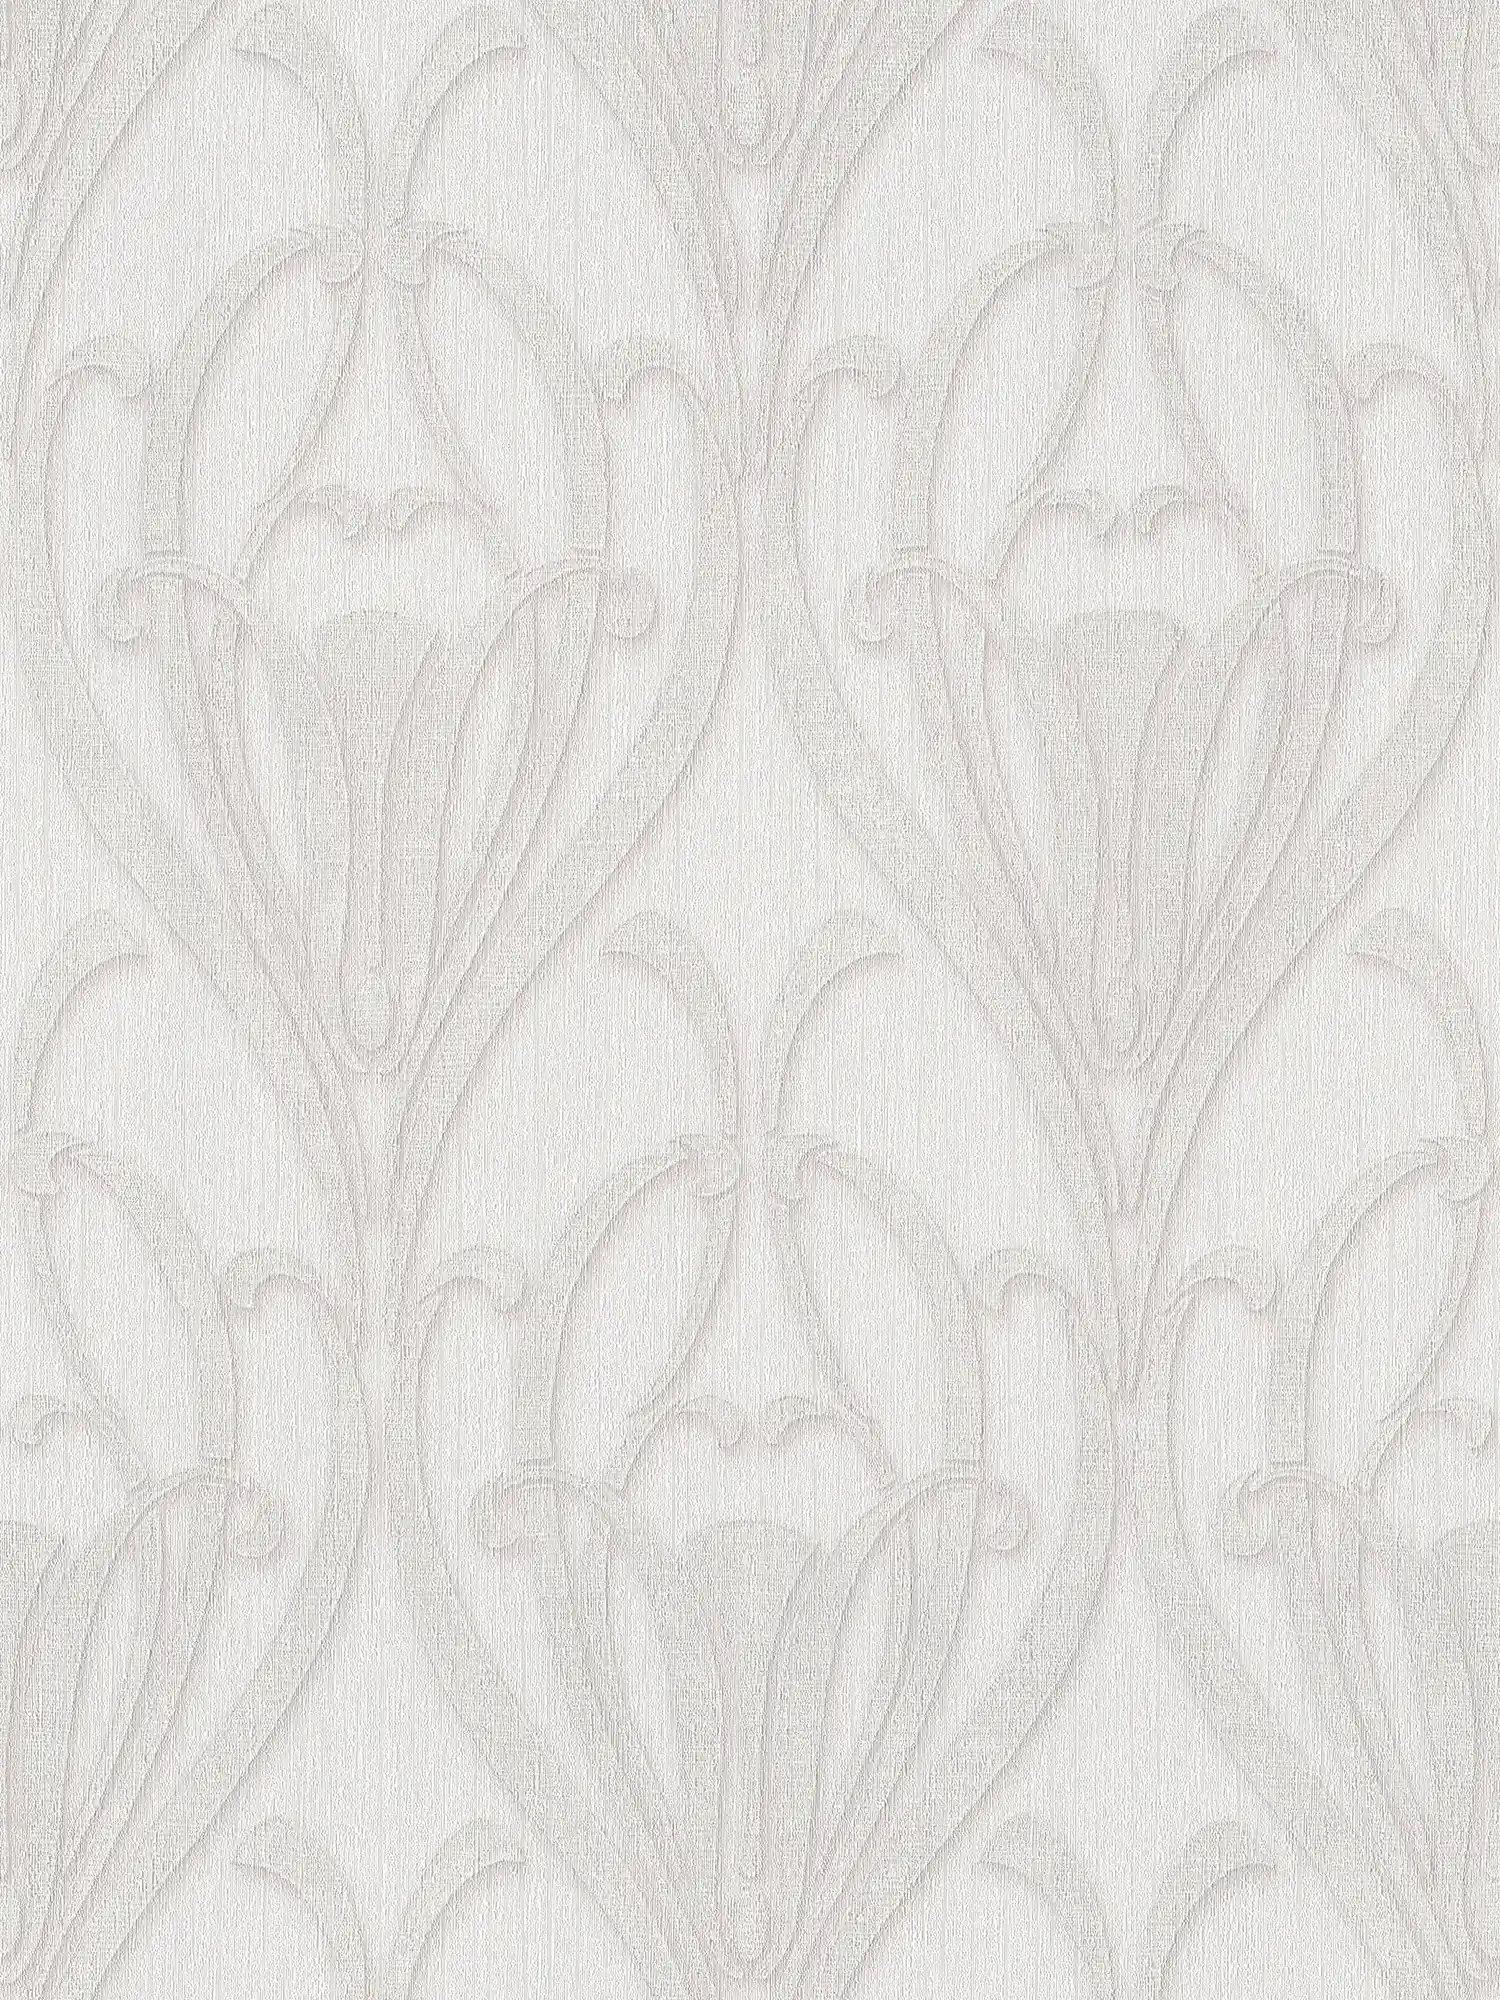 Art Deco wallpaper with ornament pattern & textile look
